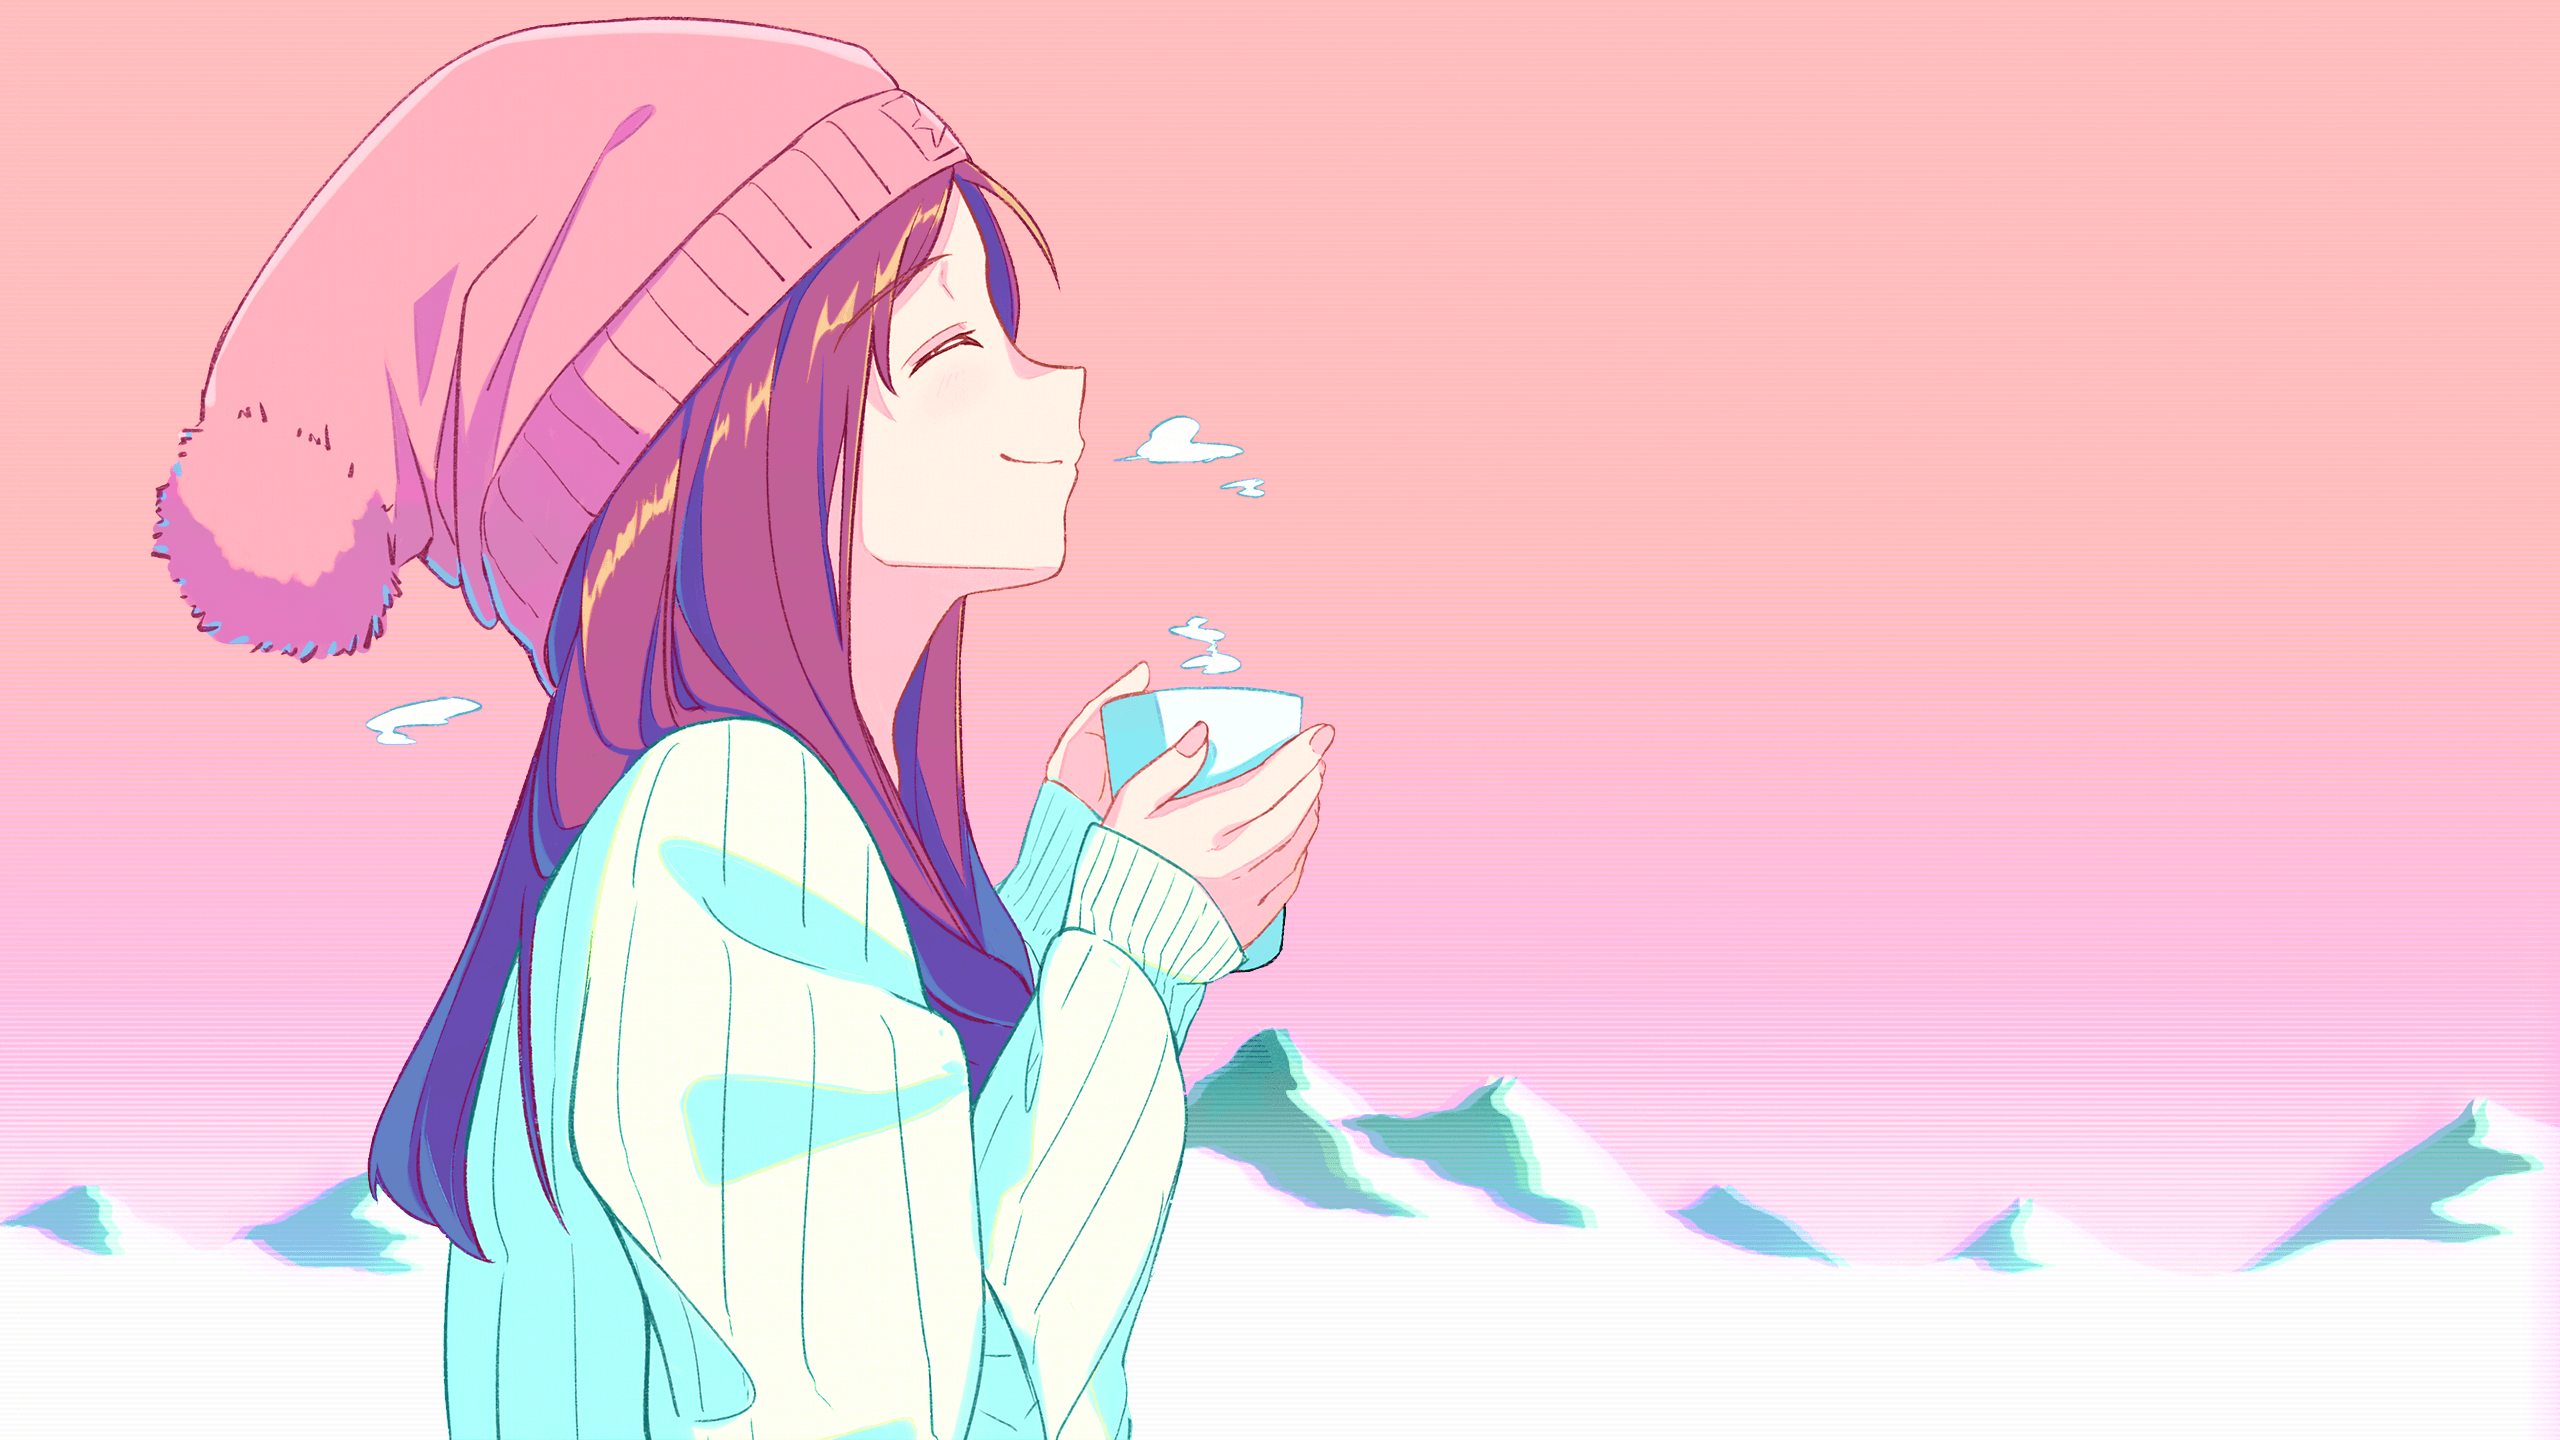 Tea Anime Girls Pink Background Drinking Sweater Hat Smiling Cup 2560x1440